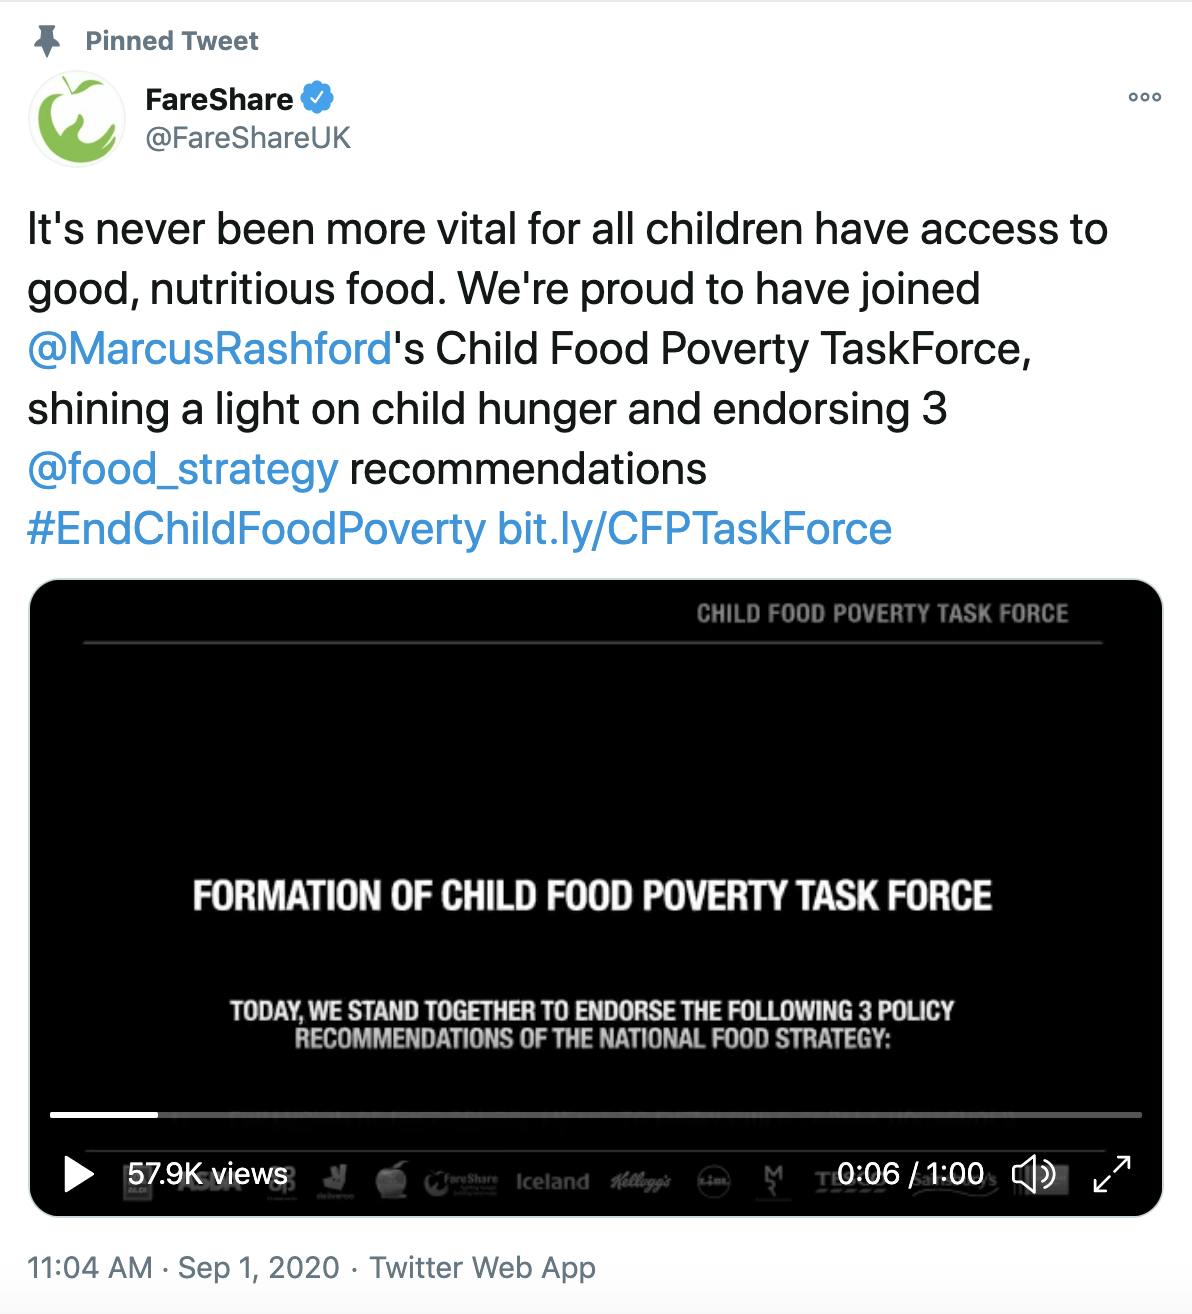 It's never been more vital for all children have access to good, nutritious food. We're proud to have joined @MarcusRashford 's Child Food Poverty TaskForce, shining a light on child hunger and endorsing 3 @food_strategy recommendations #EndChildFoodPoverty http://bit.ly/CFPTaskForce